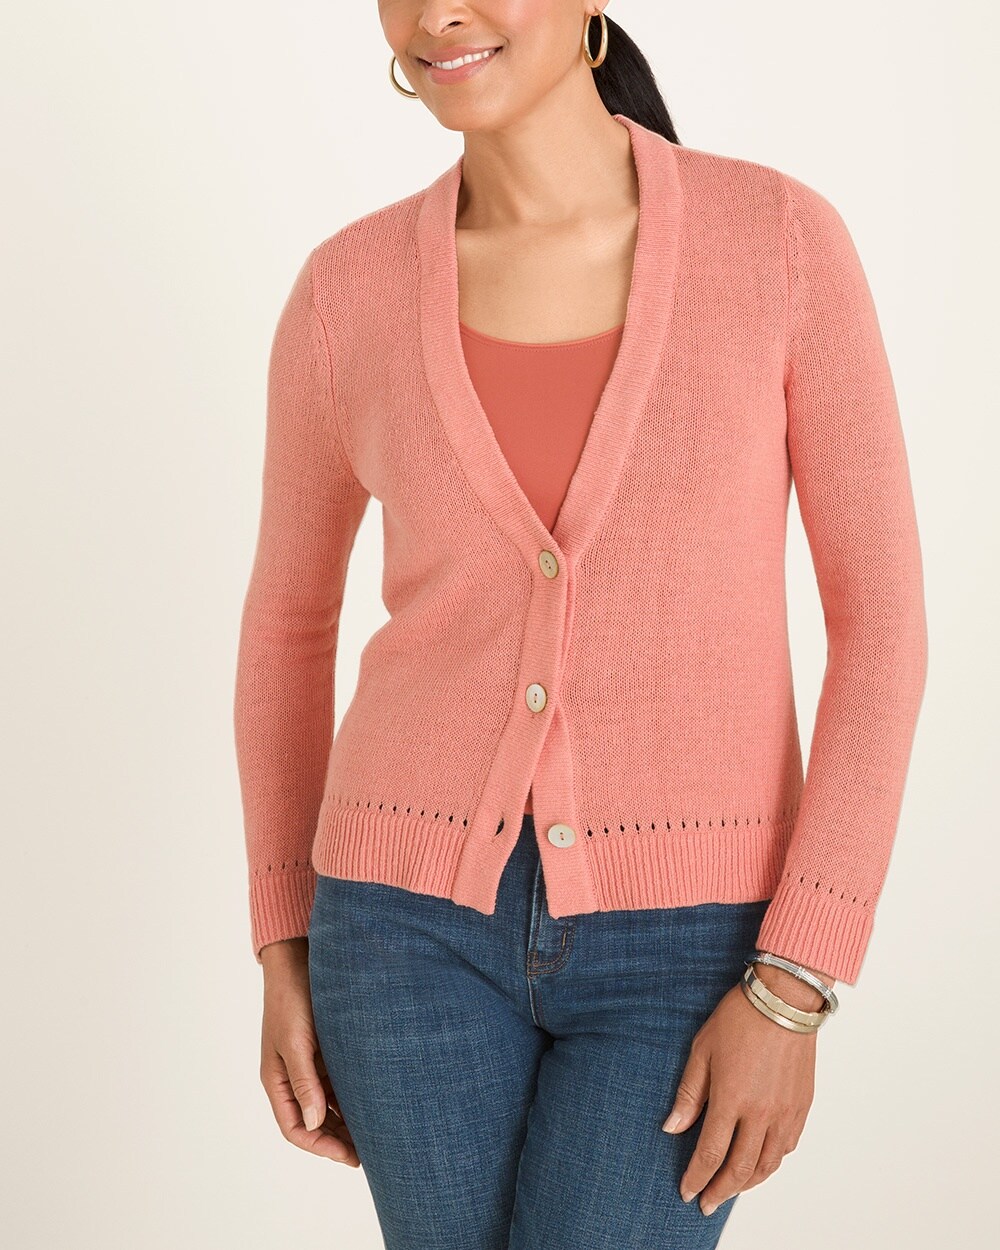 Button-Front Cardigan